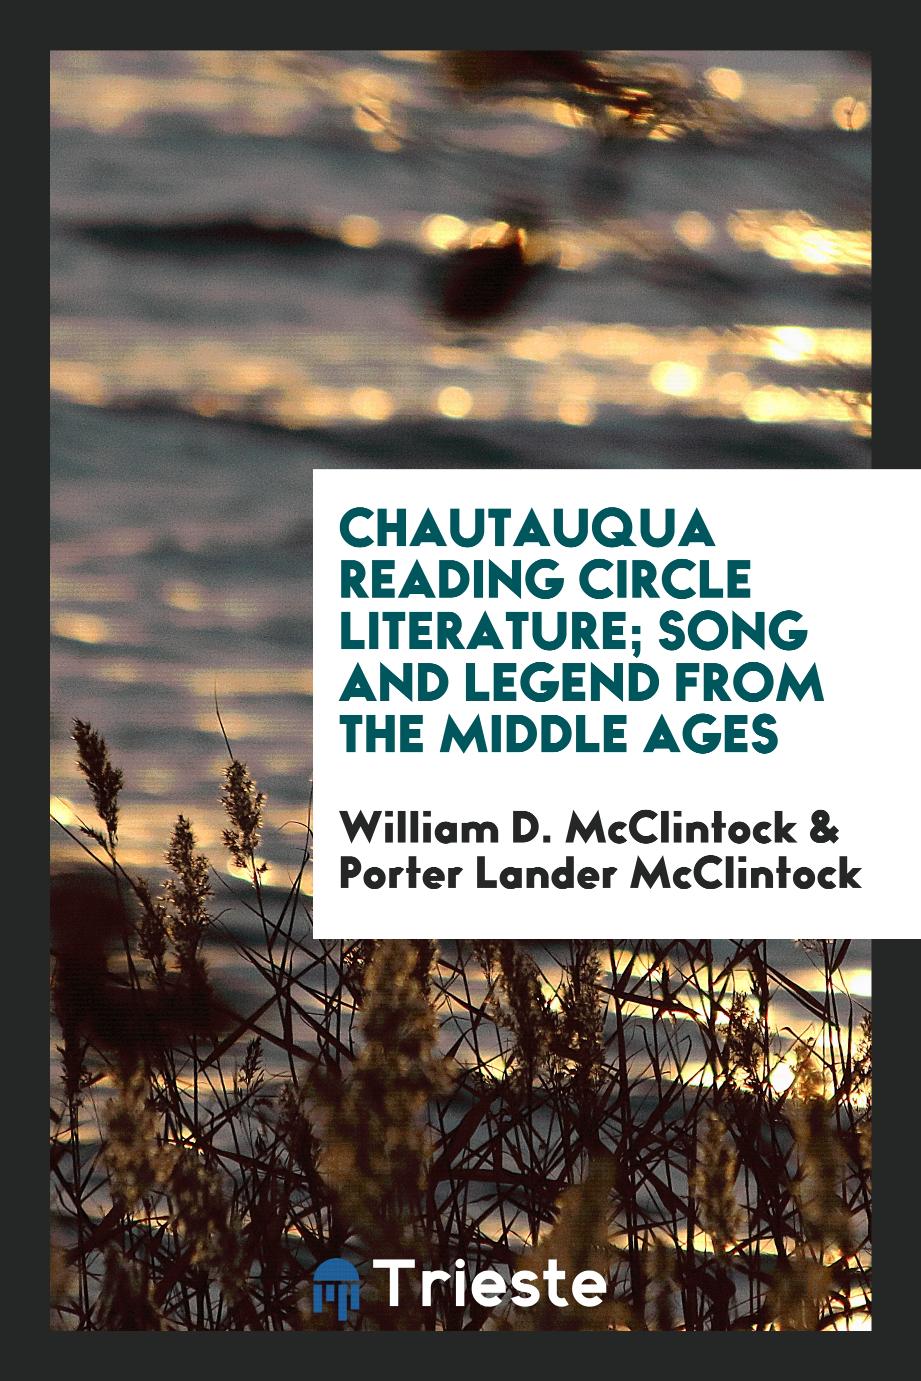 Chautauqua Reading Circle Literature; Song and Legend from the Middle Ages